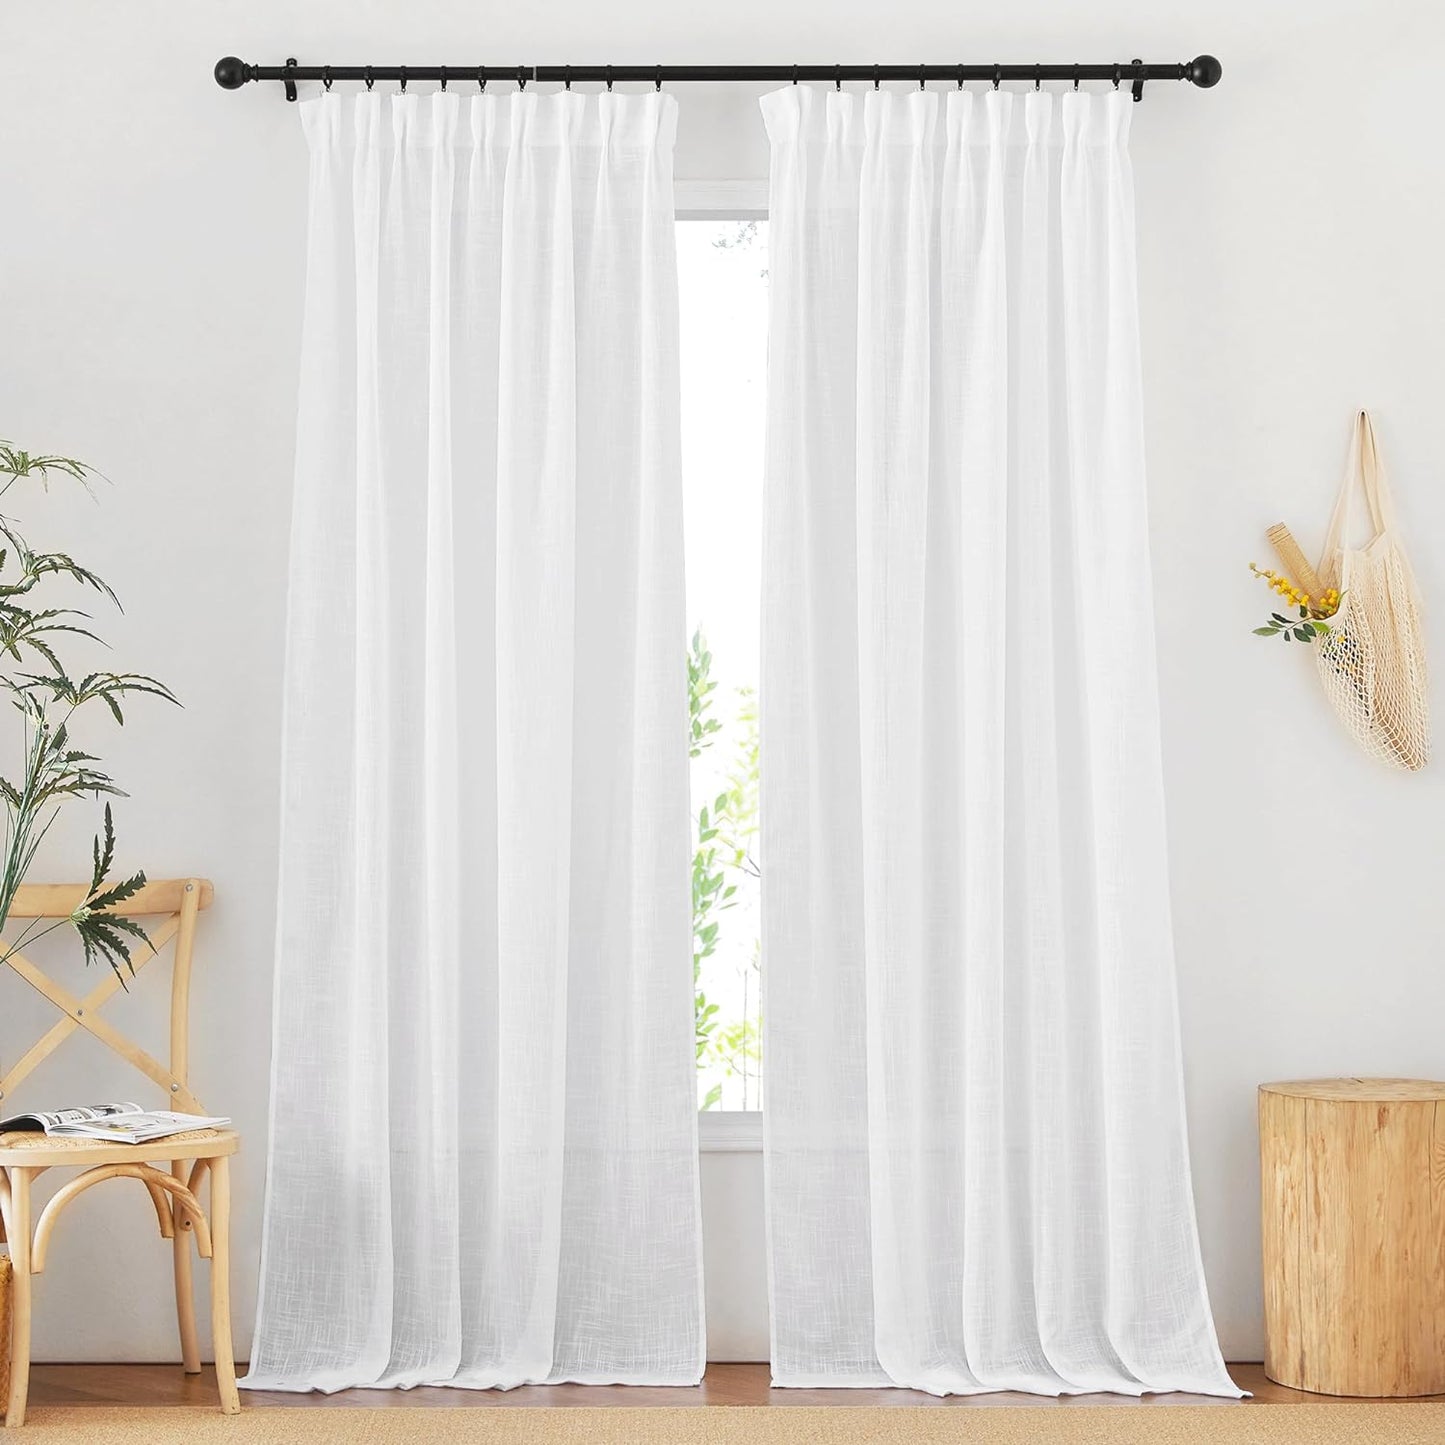 NICETOWN White Curtains Sheer - Semi Sheer Window Covering, Light & Airy Privacy Rod Pocket Back Tab Pinche Pleated Drapes for Bedroom Living Room Patio Glass Door, 52 X 63 Inches Long, Set of 2  NICETOWN White W52 X L95 